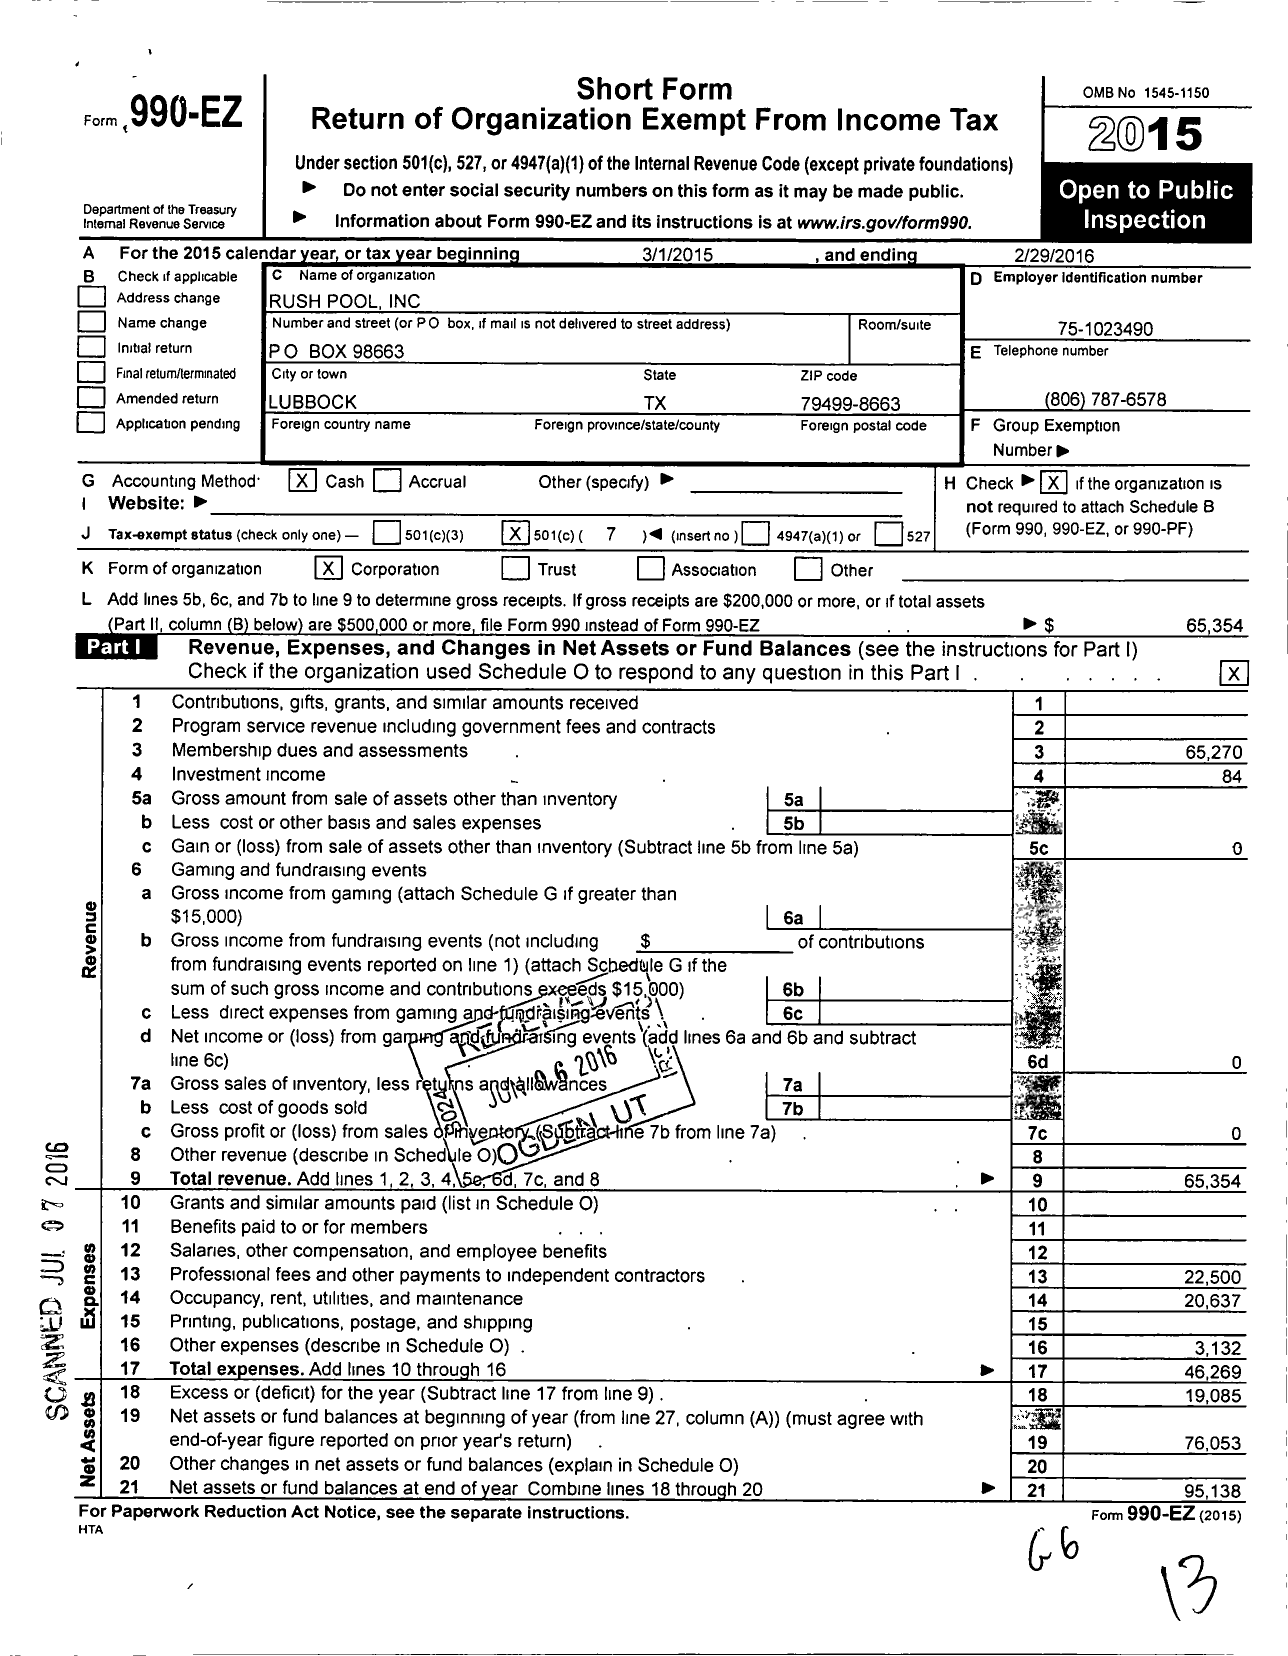 Image of first page of 2015 Form 990EO for Rush Pool